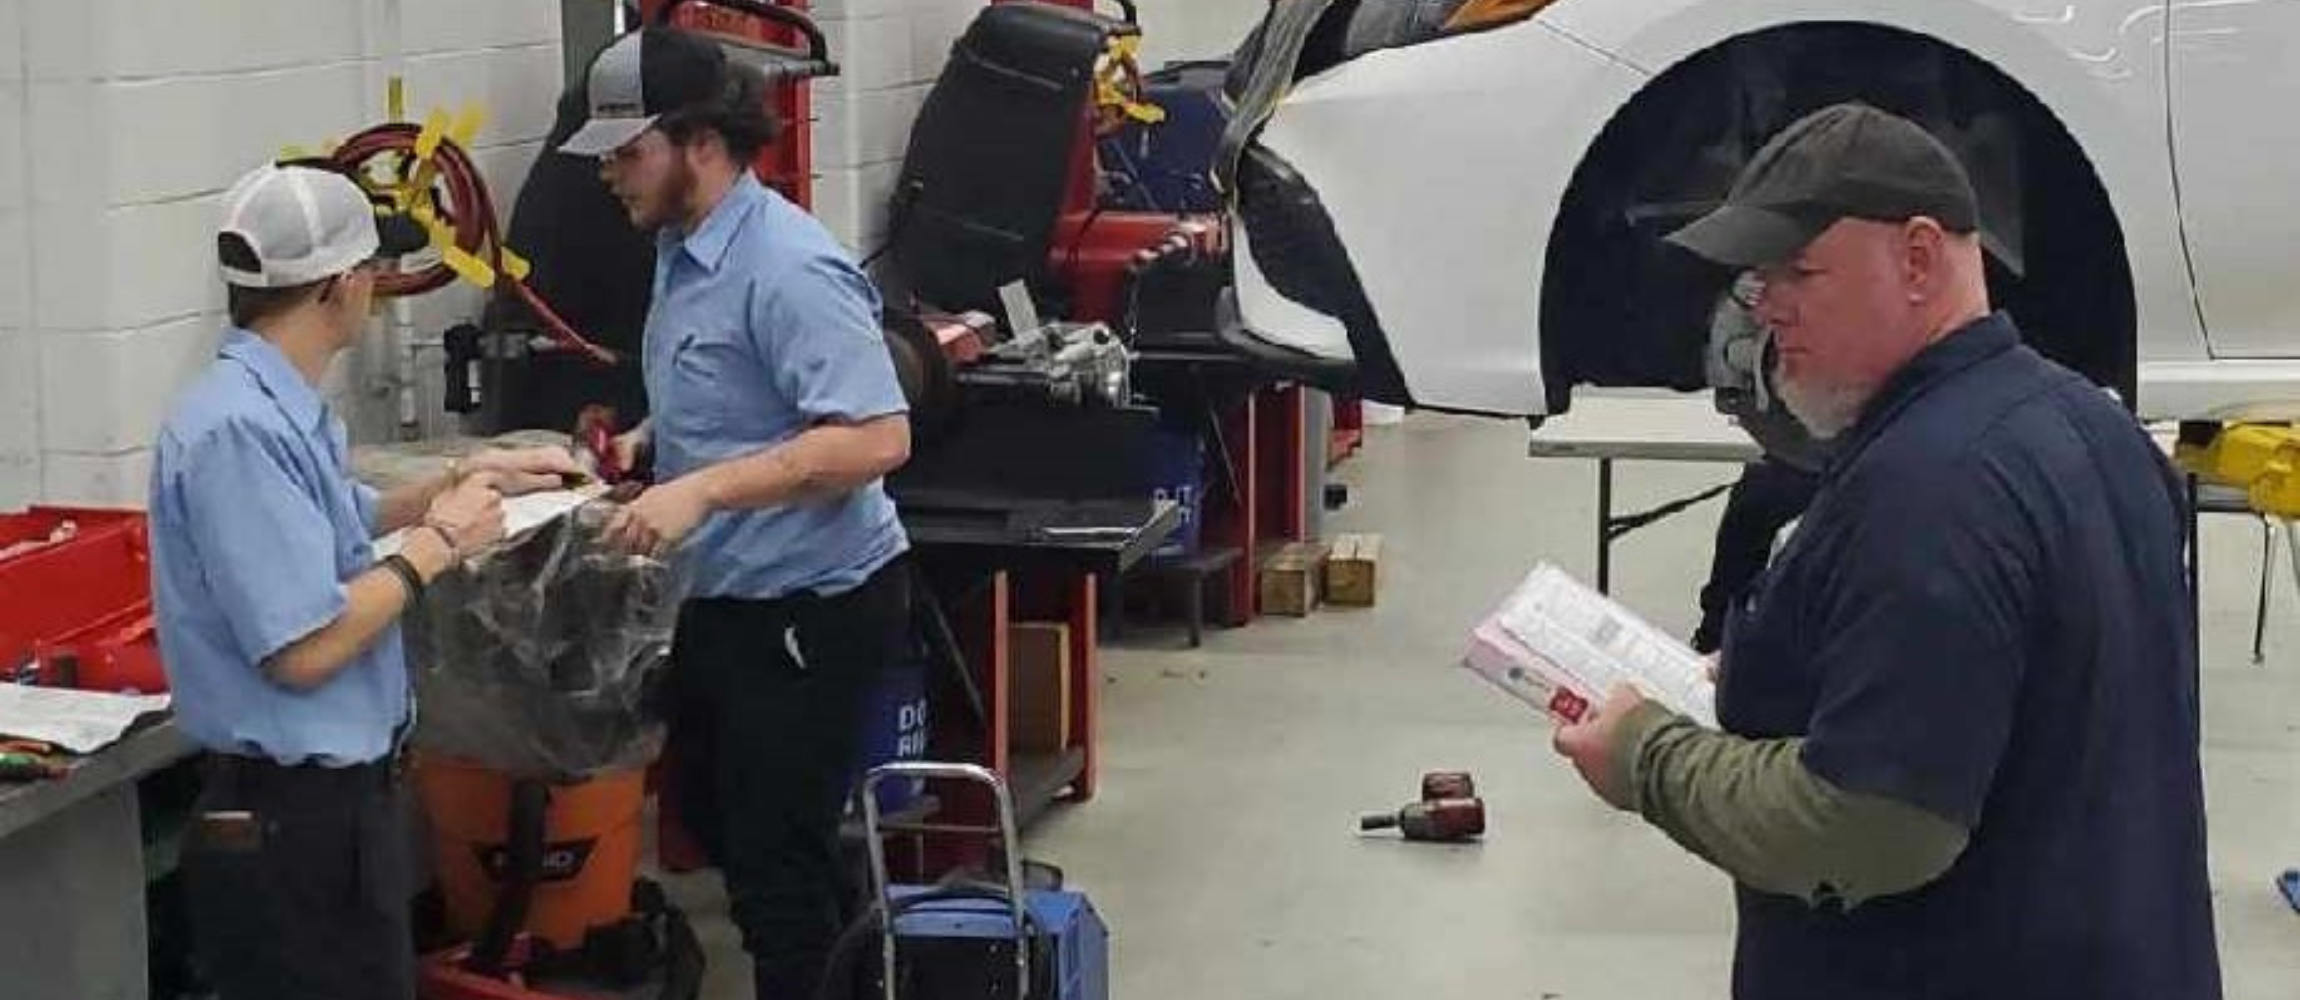 Students and teacher in automotive class